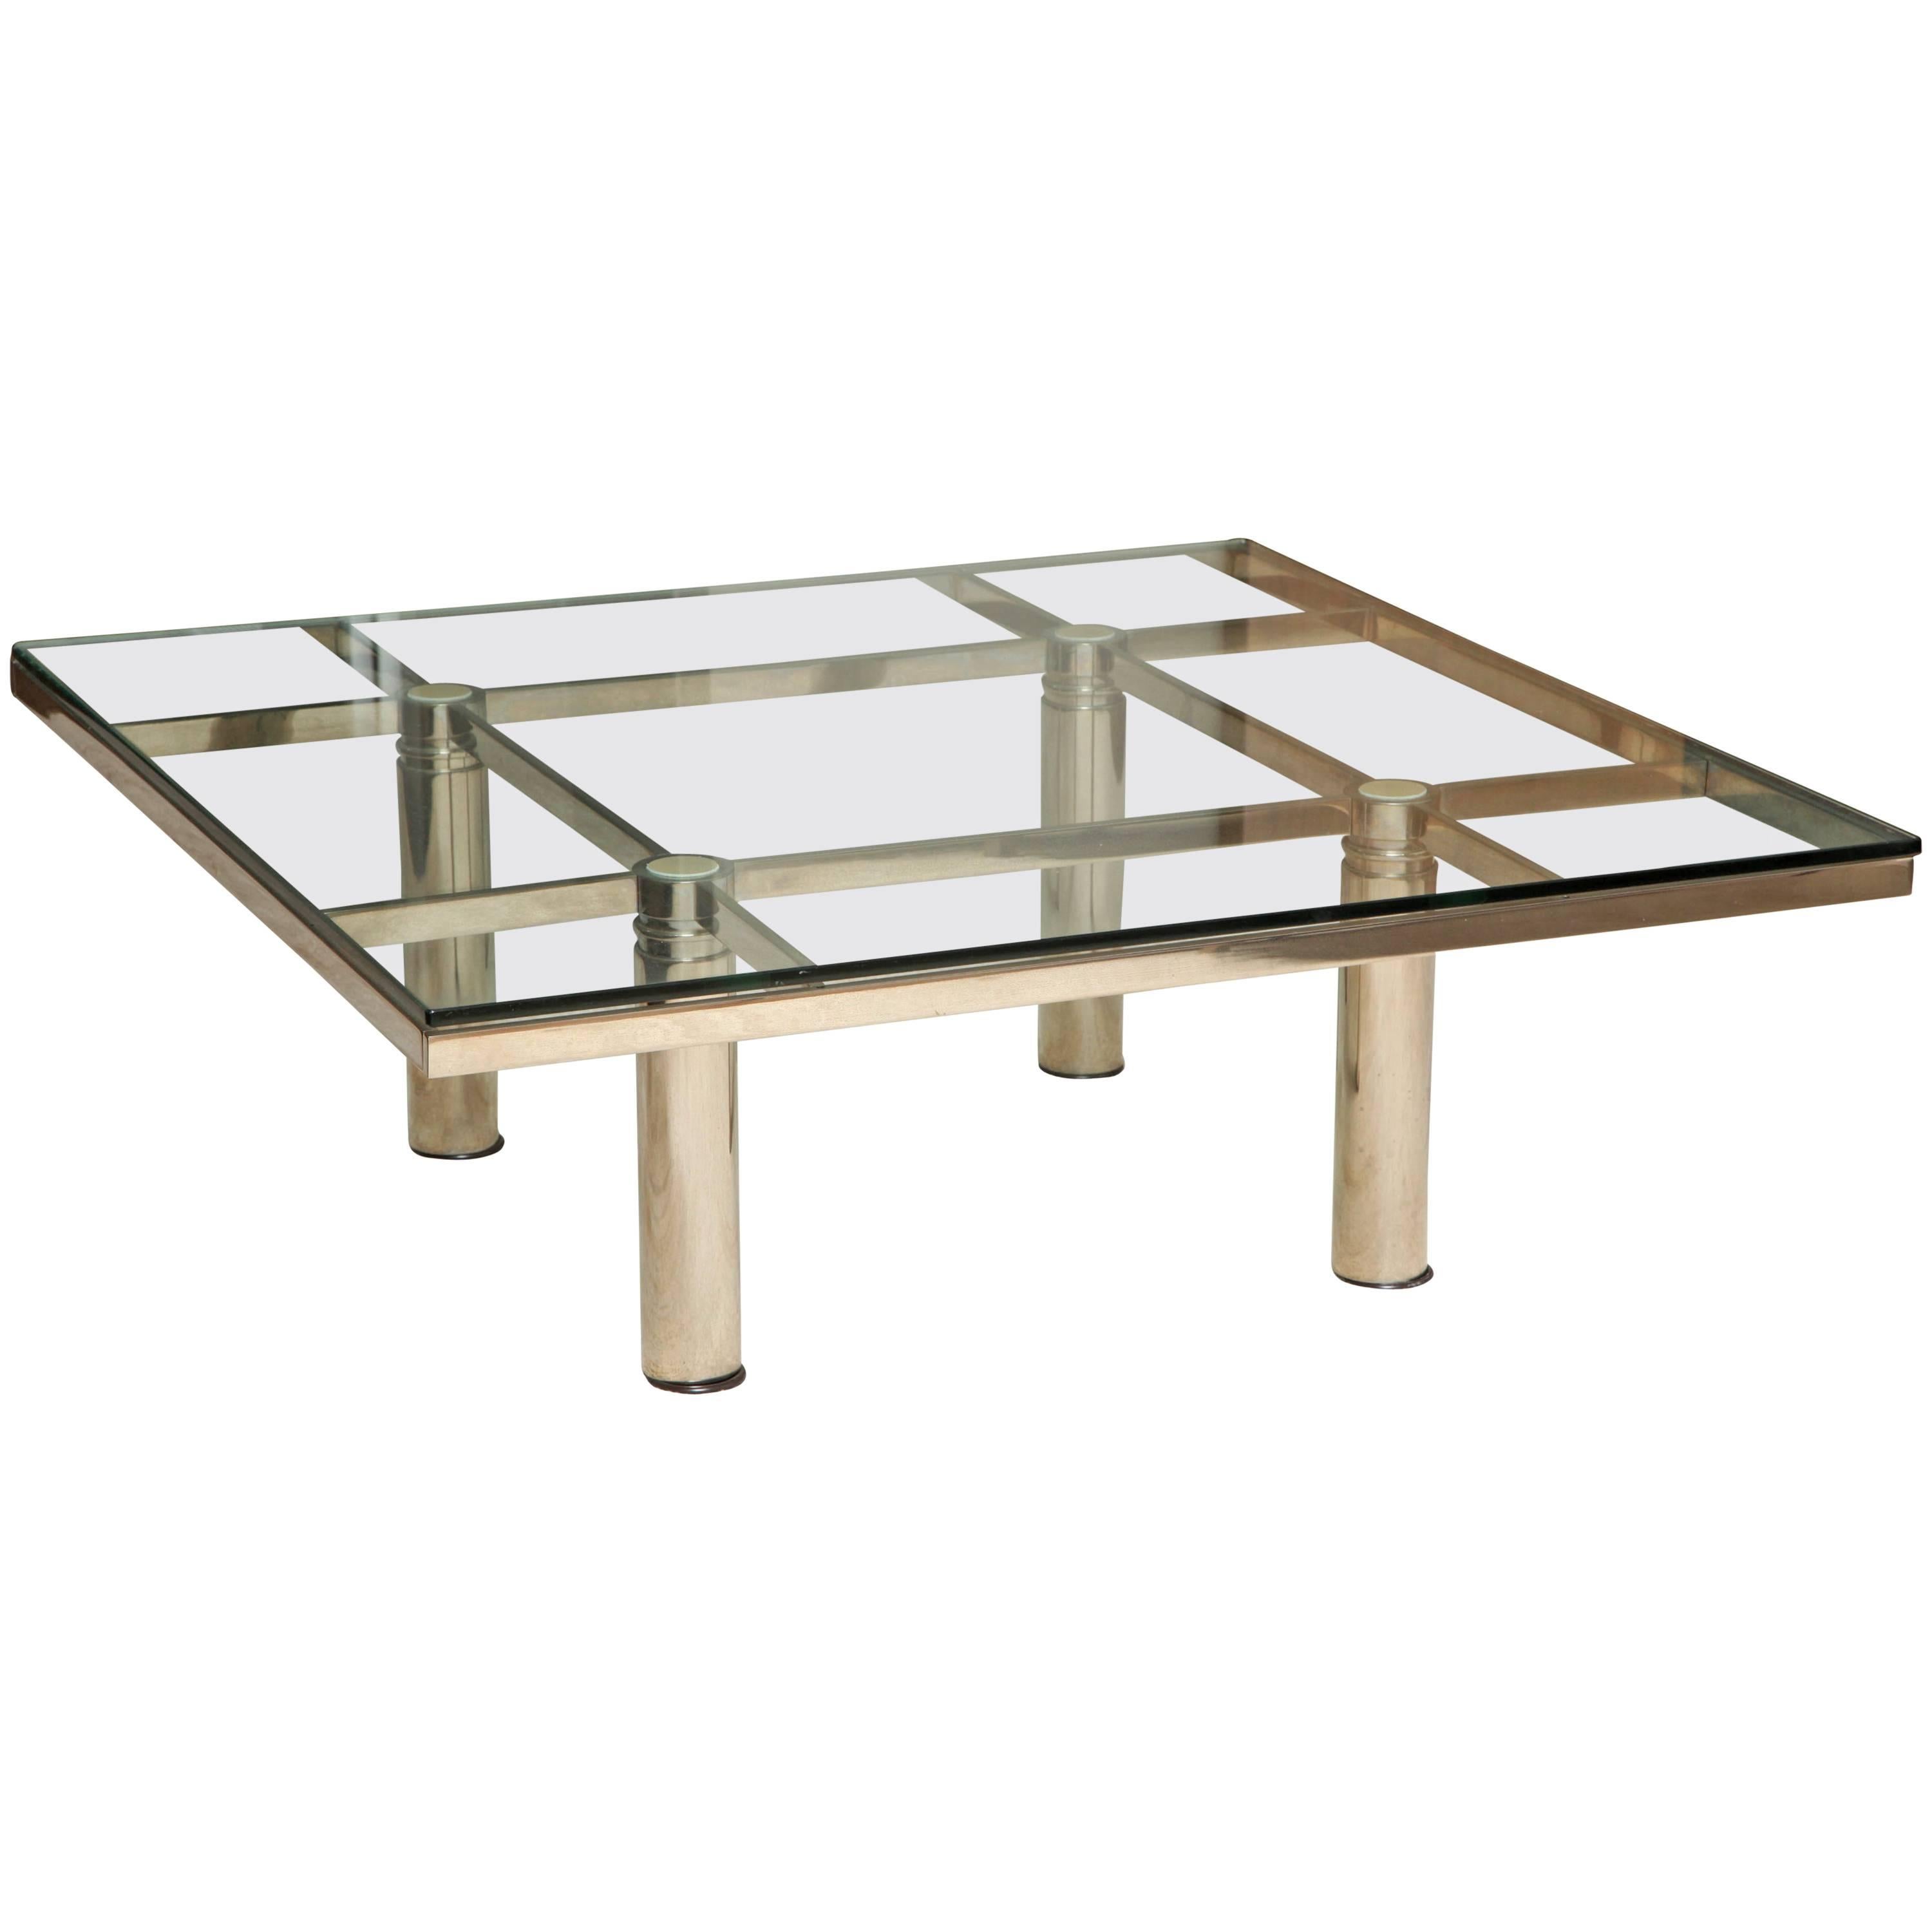 "Andre" Chrome and Glass Square Cocktail Table by Tobia Scarpa for Knoll